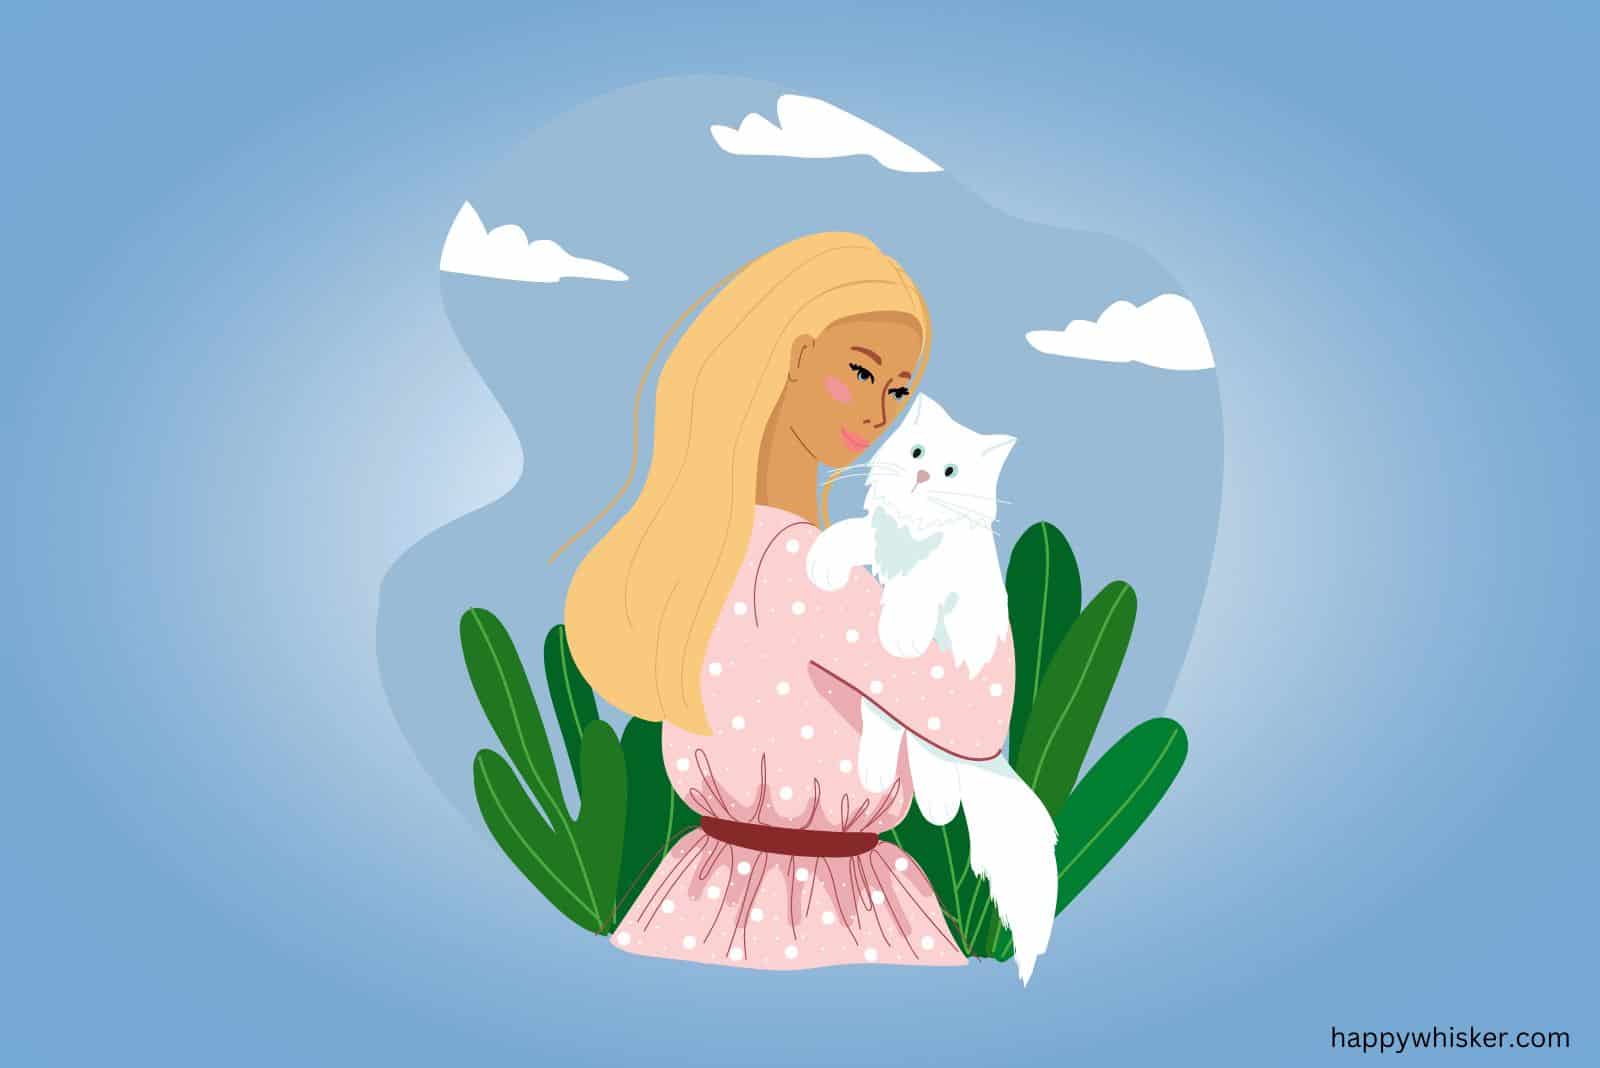 adorable tall blonde woman holding a cat in her arms